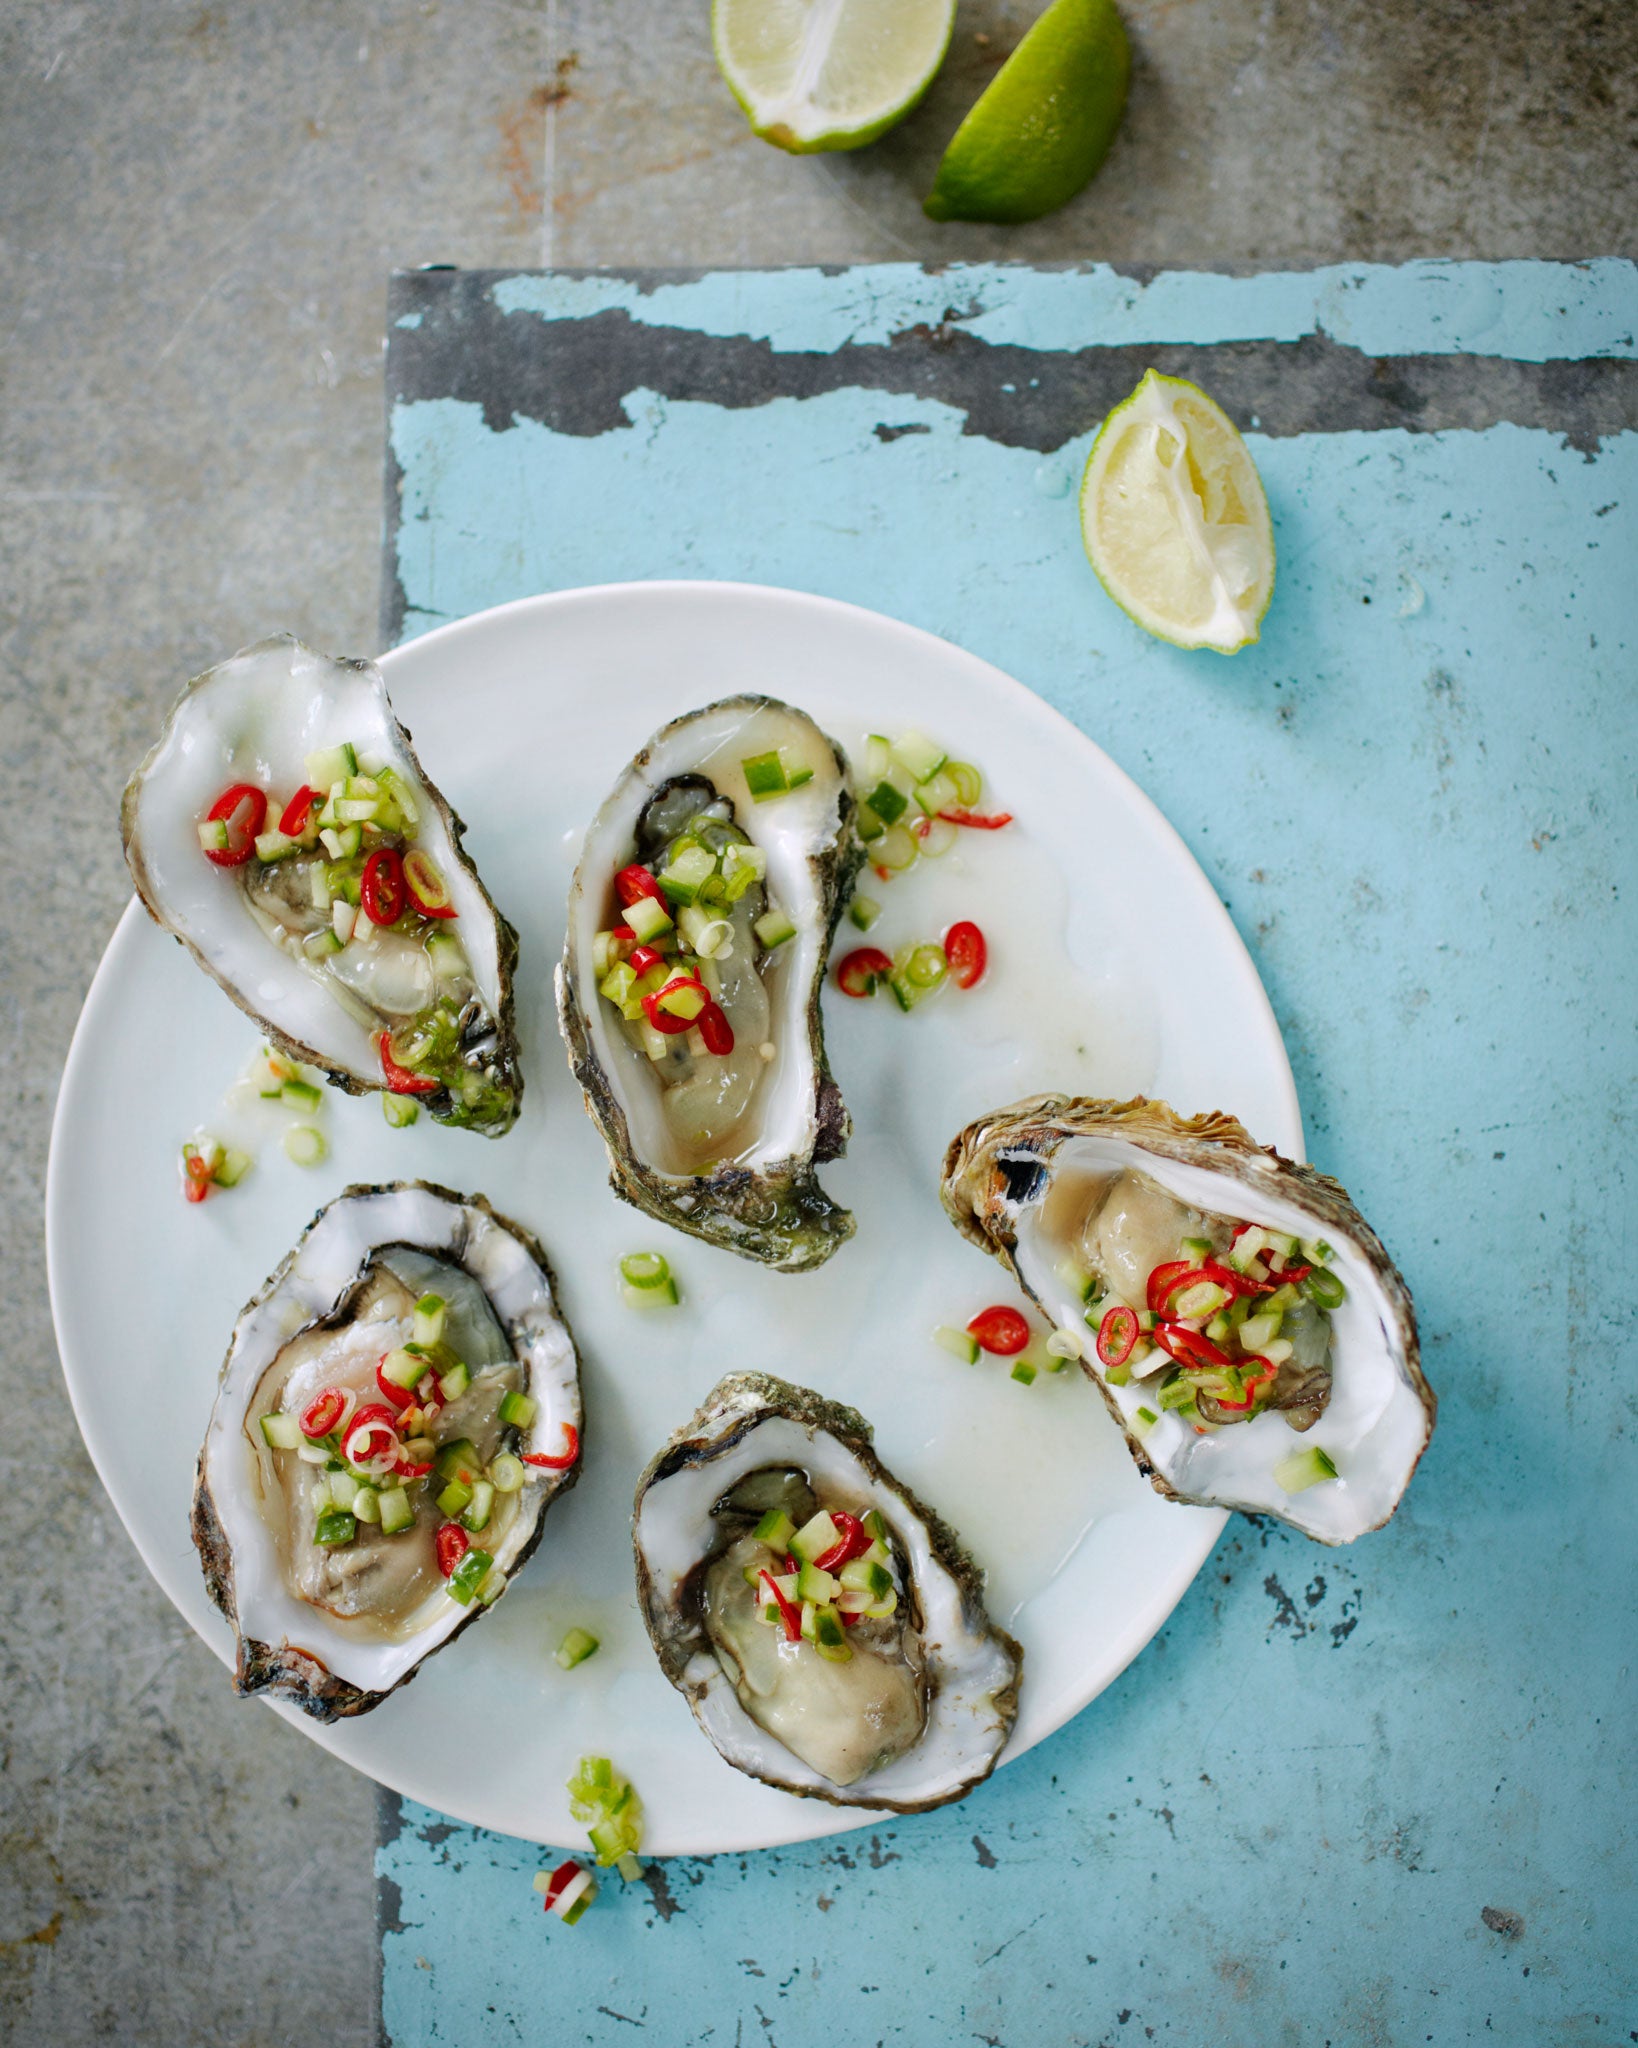 Punchy dressing: Oysters with chilli